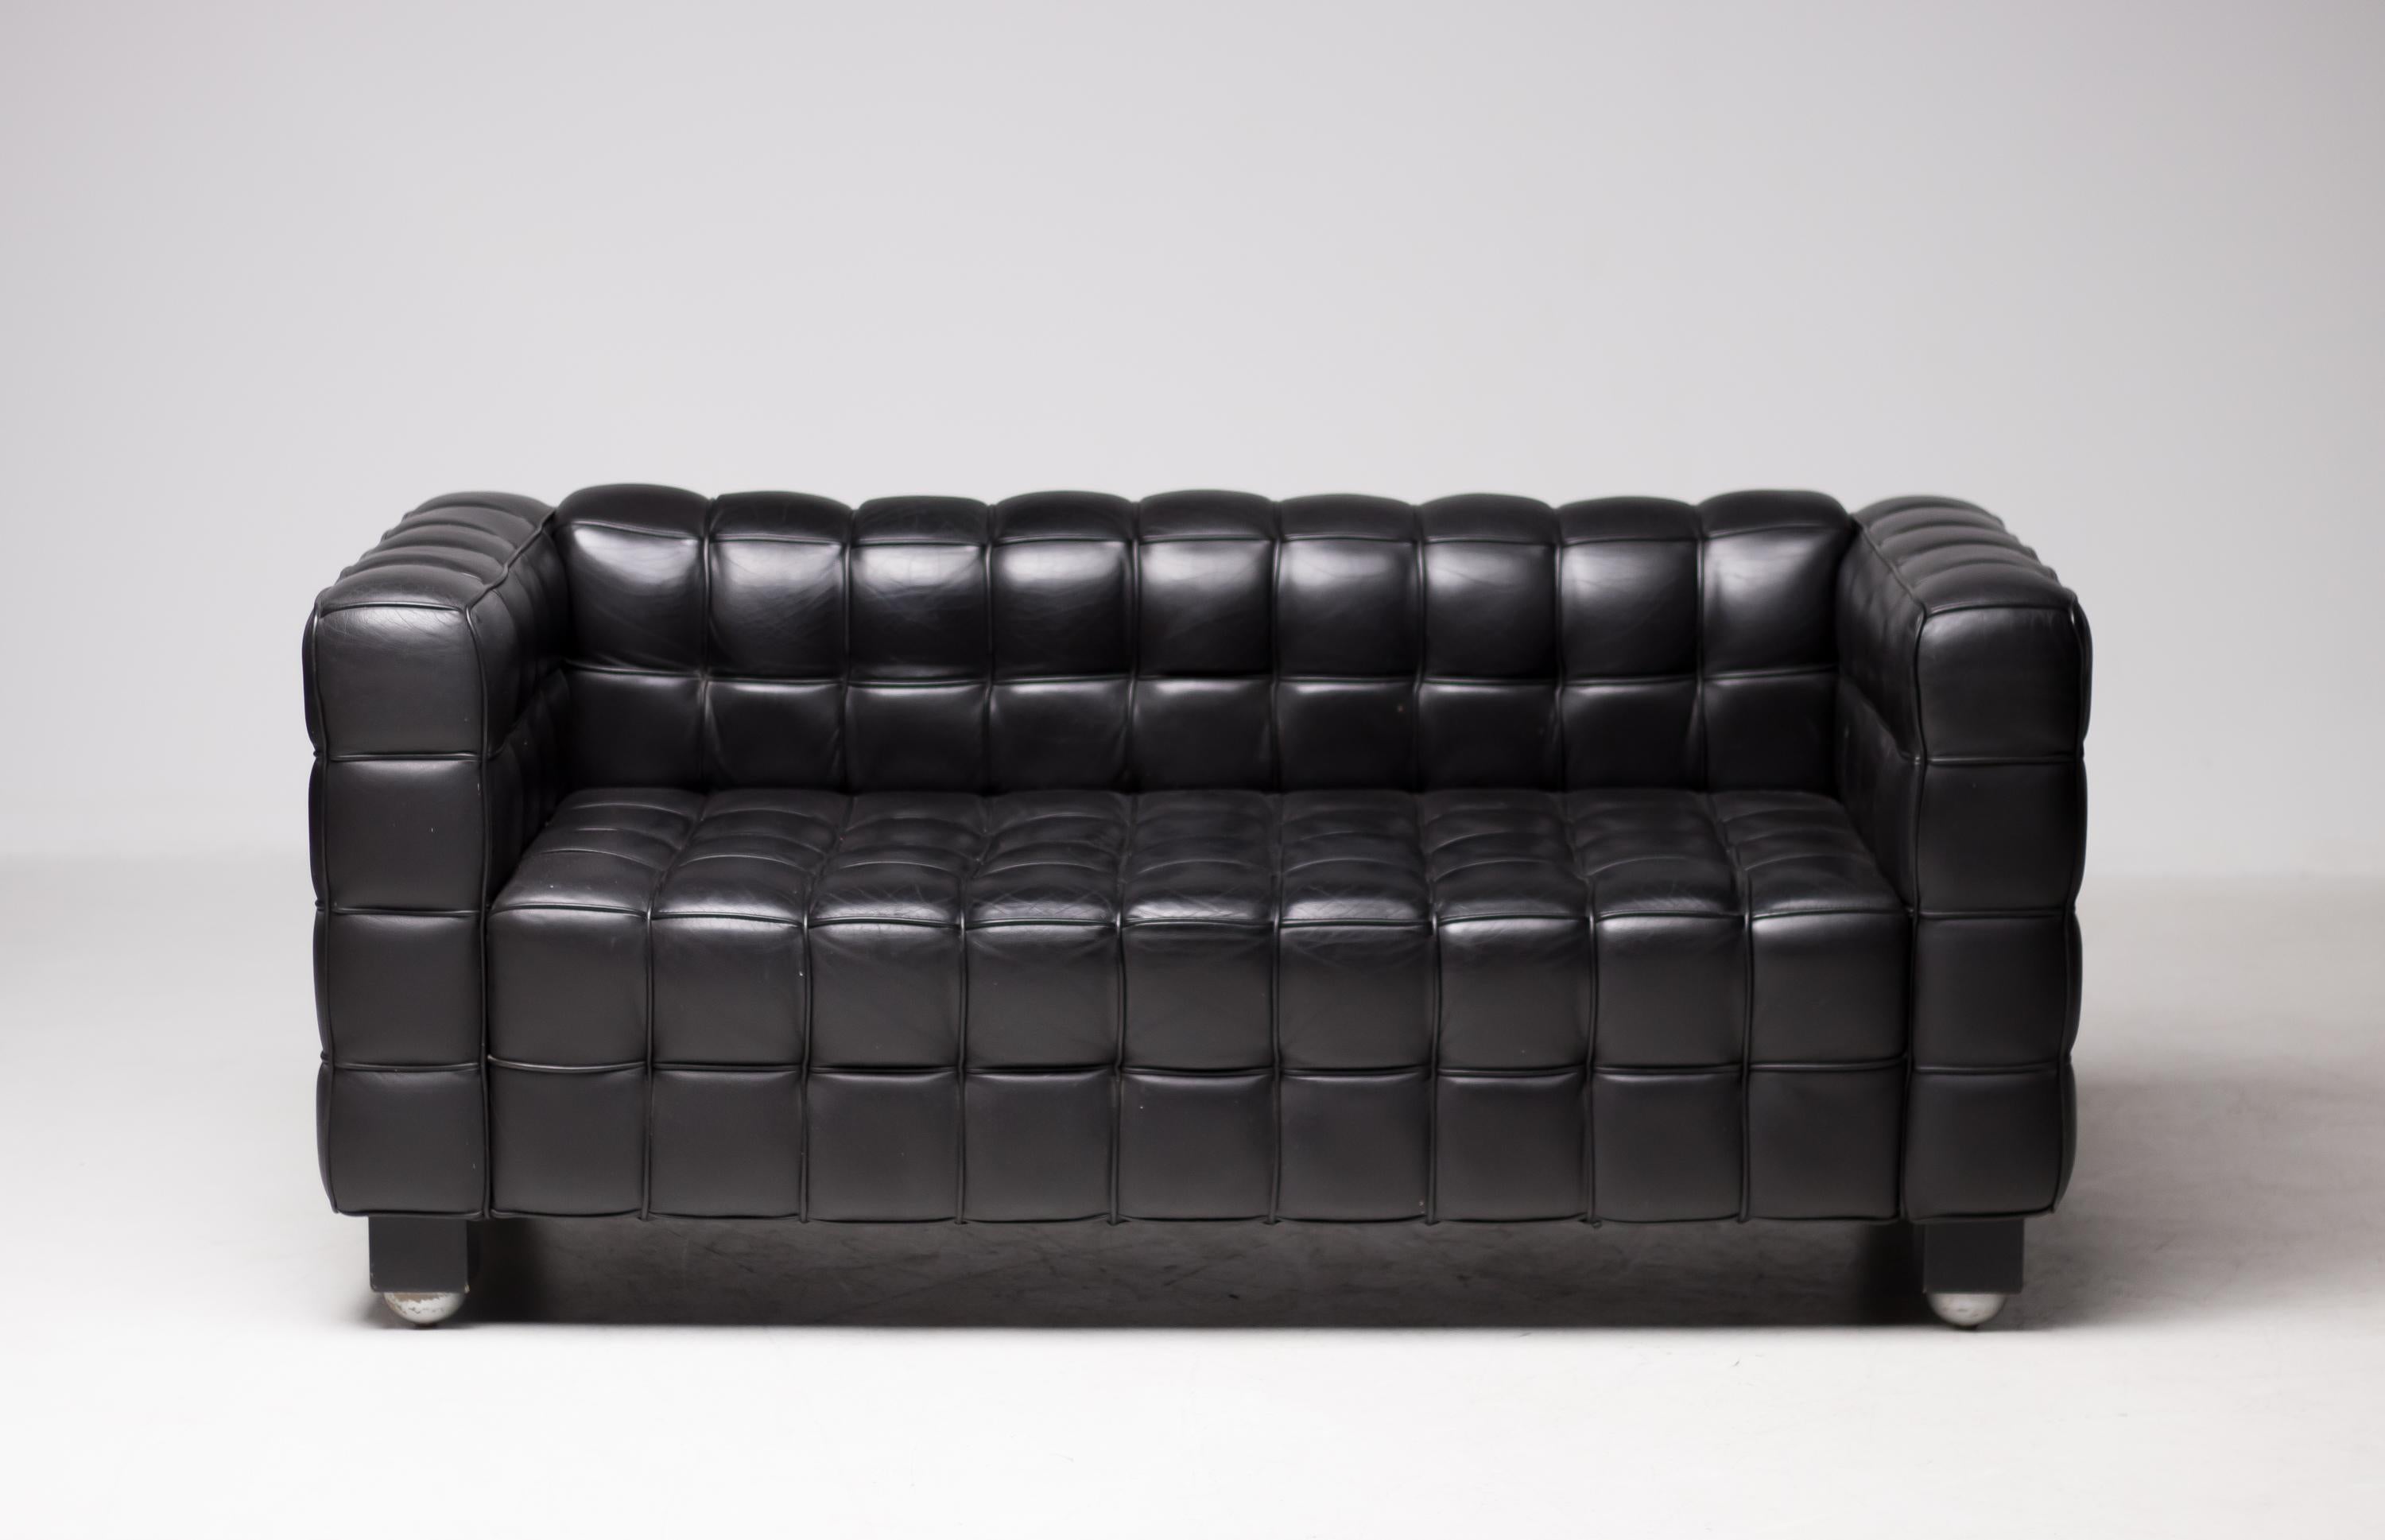 Stained Black Leather Kubus Sofa by Josef Hoffman for Wittmann